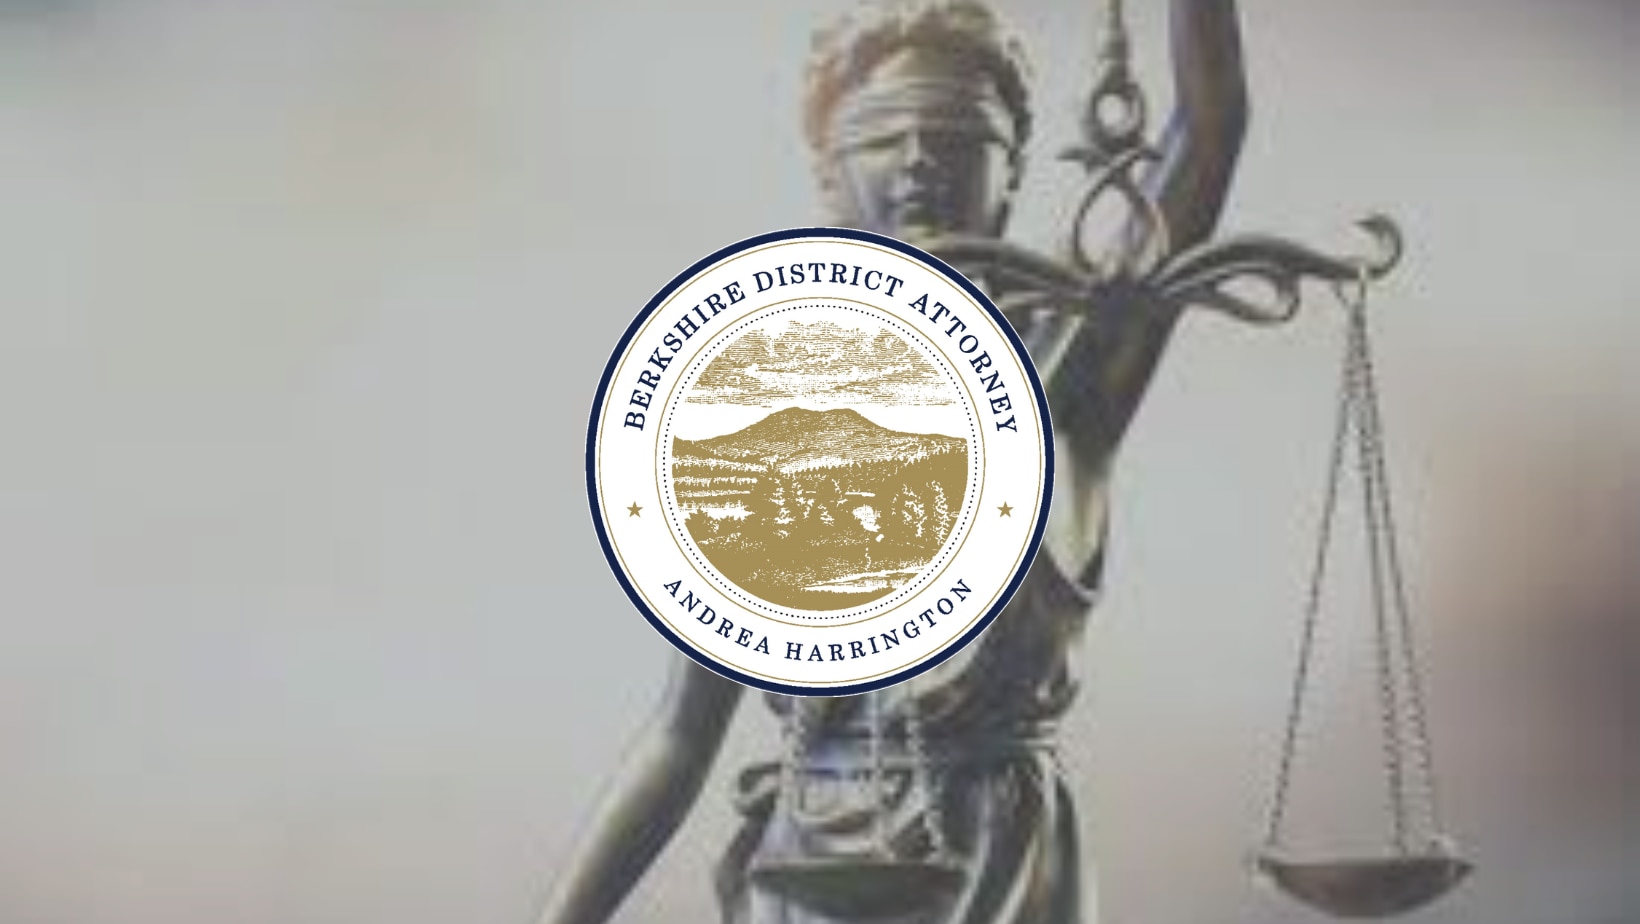 Berkshire District Attorney's Office seal. 